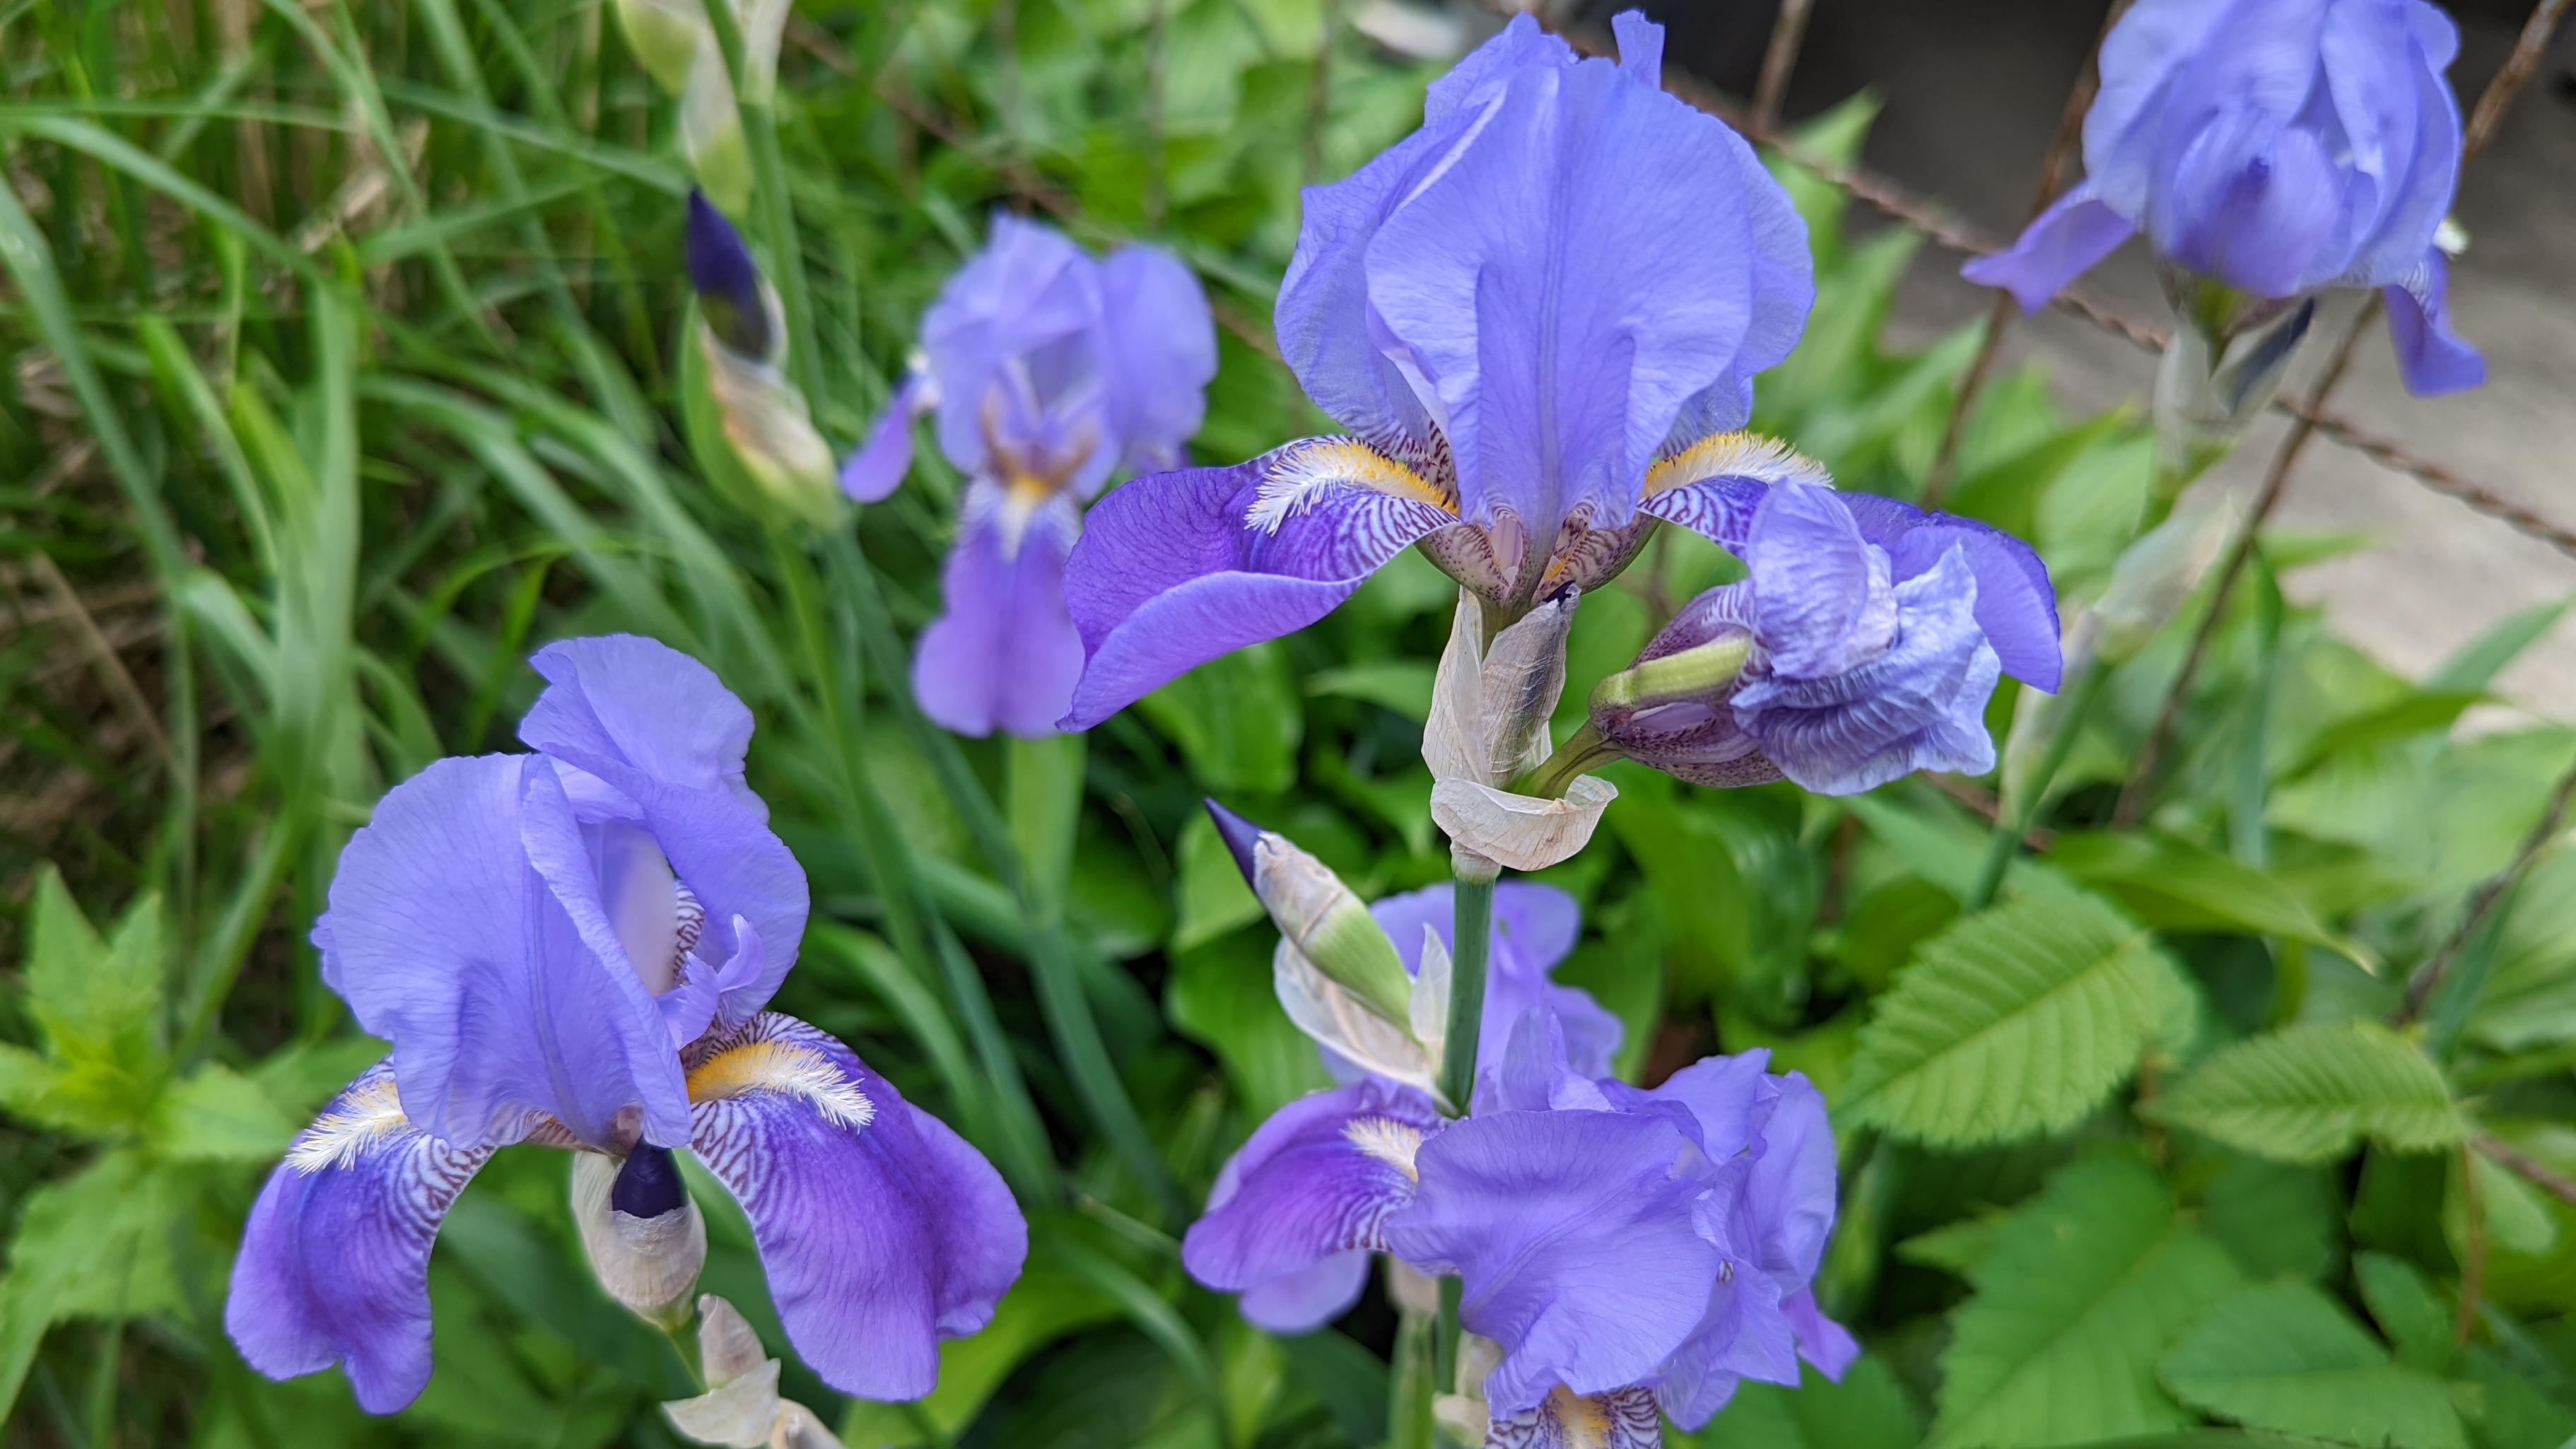 A photograph of purple flowers growing among fresh green leaves.